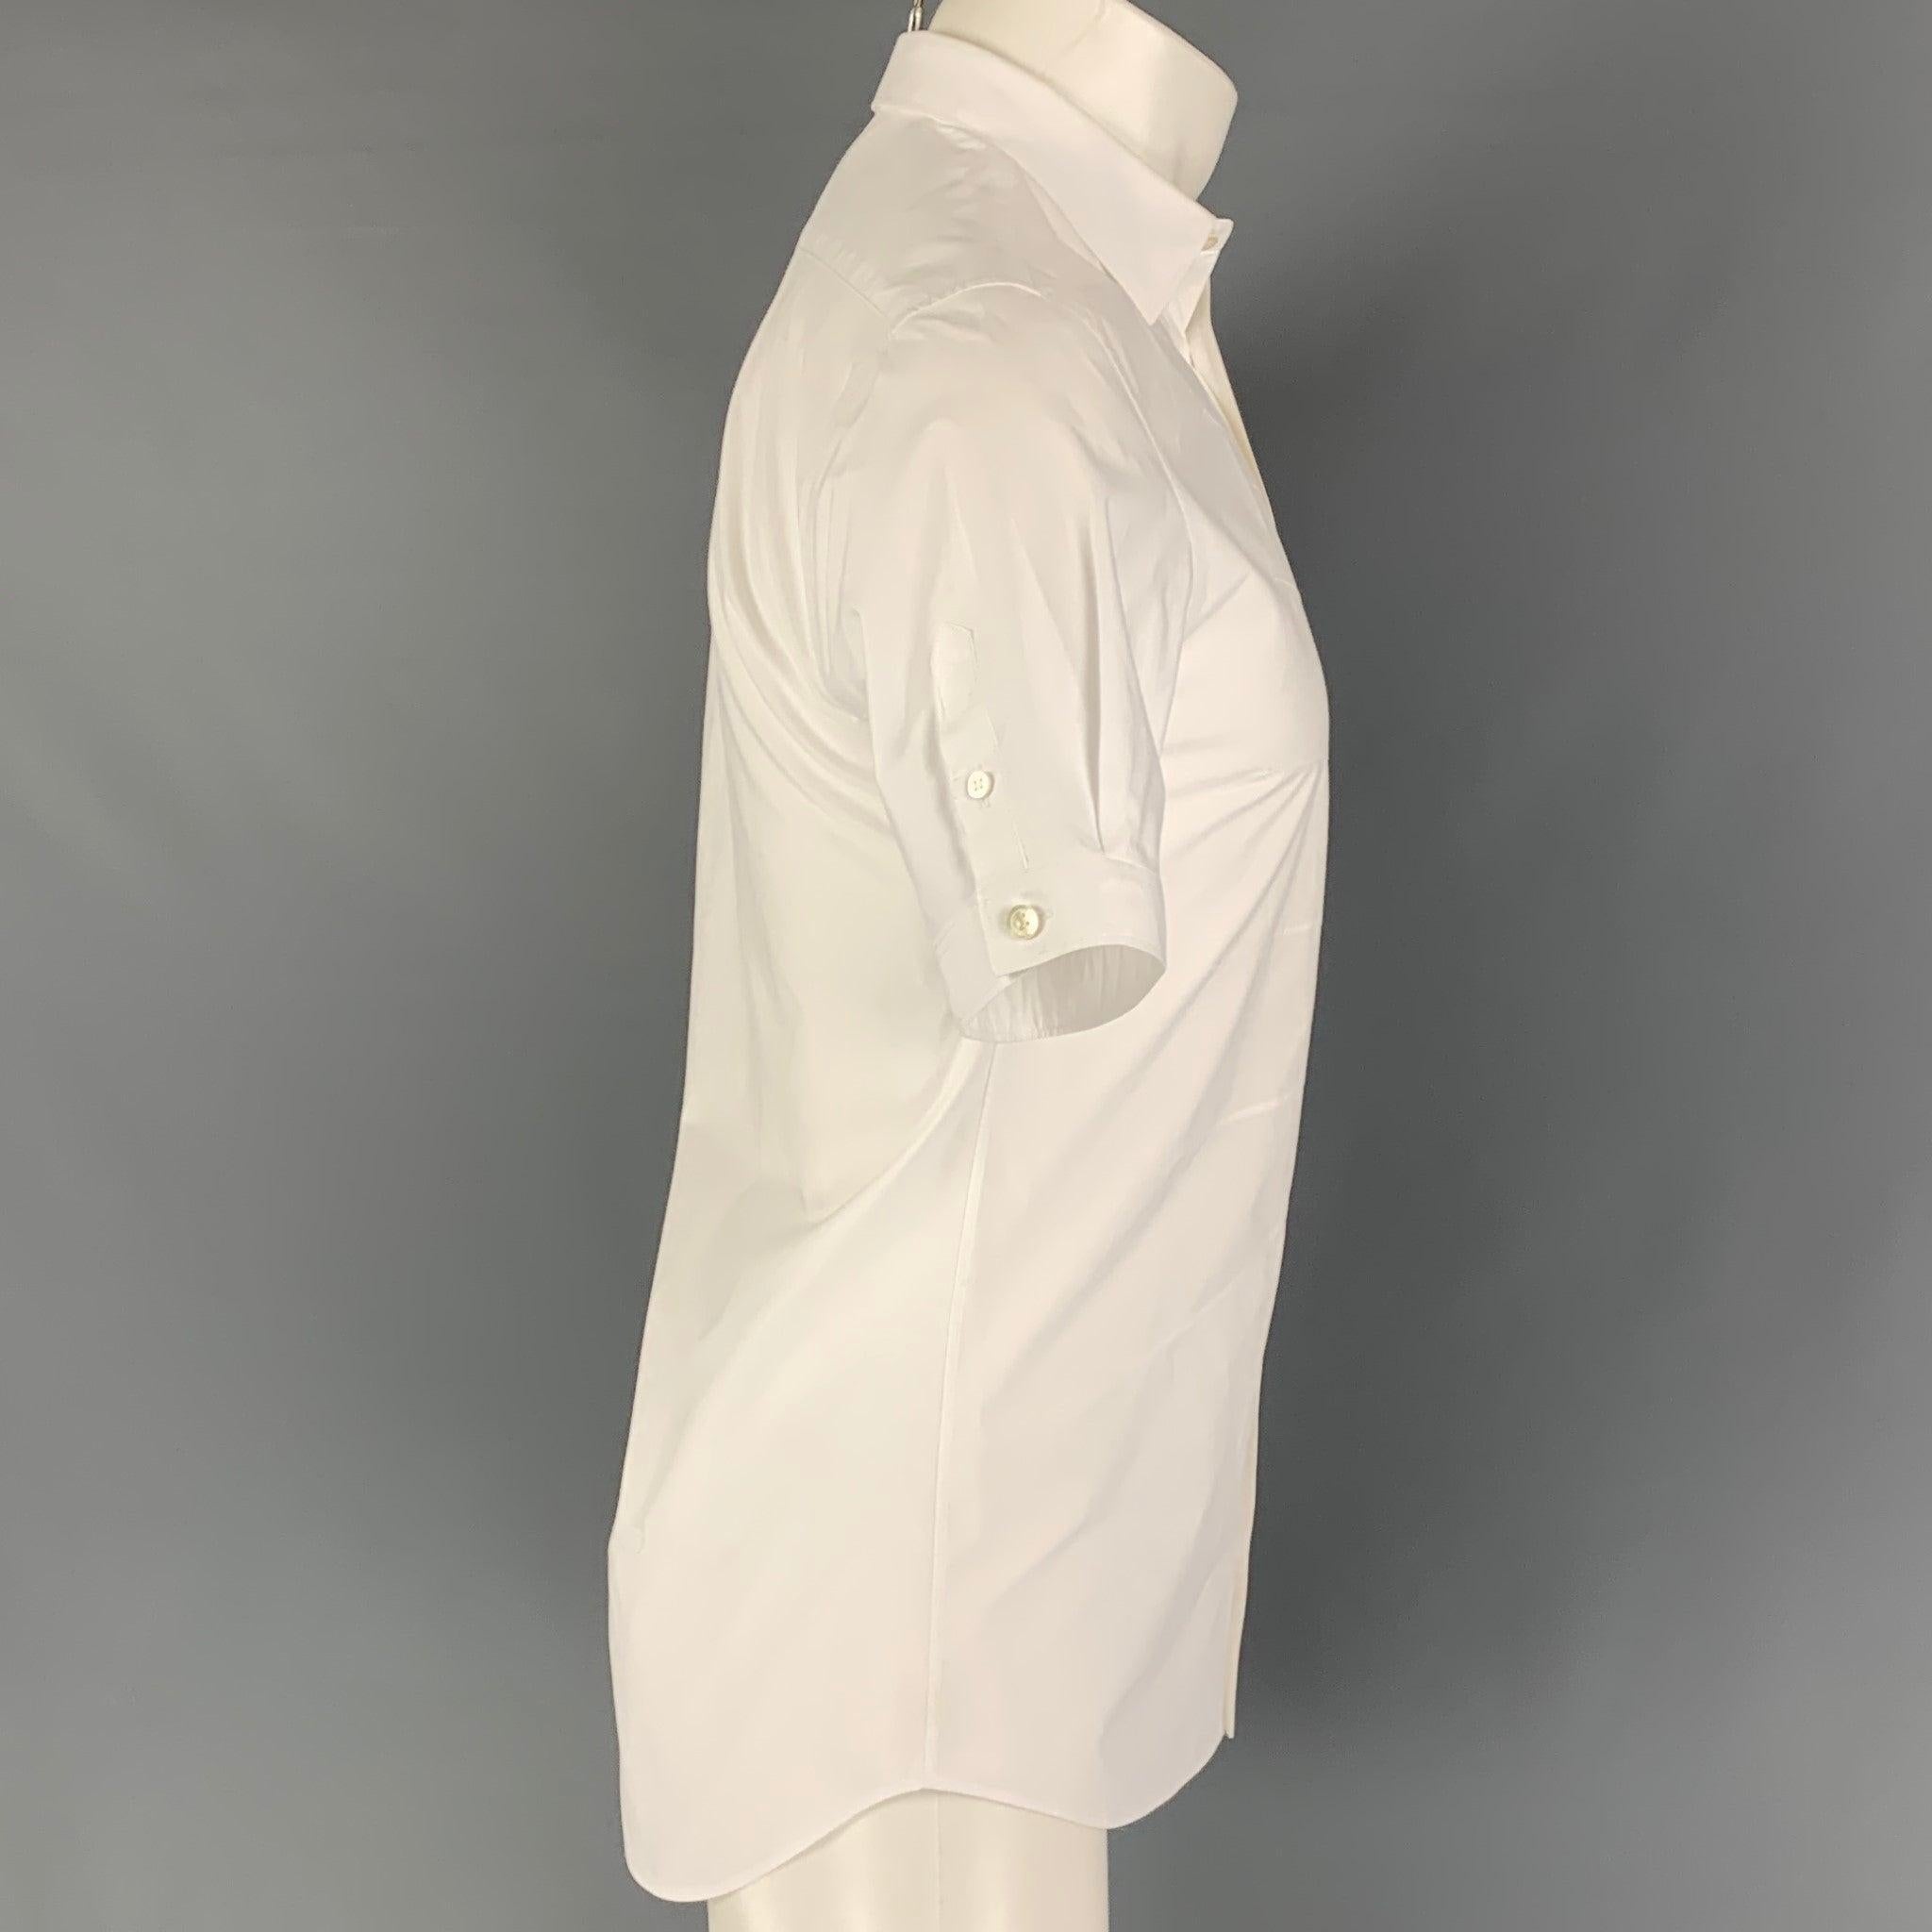 ALEXANDER McQUEEN short sleeve shirt comes in a white cotton featuring top stitching designs, buttoned sleeves, and a button up closure. Made in Romania.Very Good
 Pre-Owned Condition. 
 

 Marked:  15 
 

 Measurements: 
  
 Shoulder: 16 inches